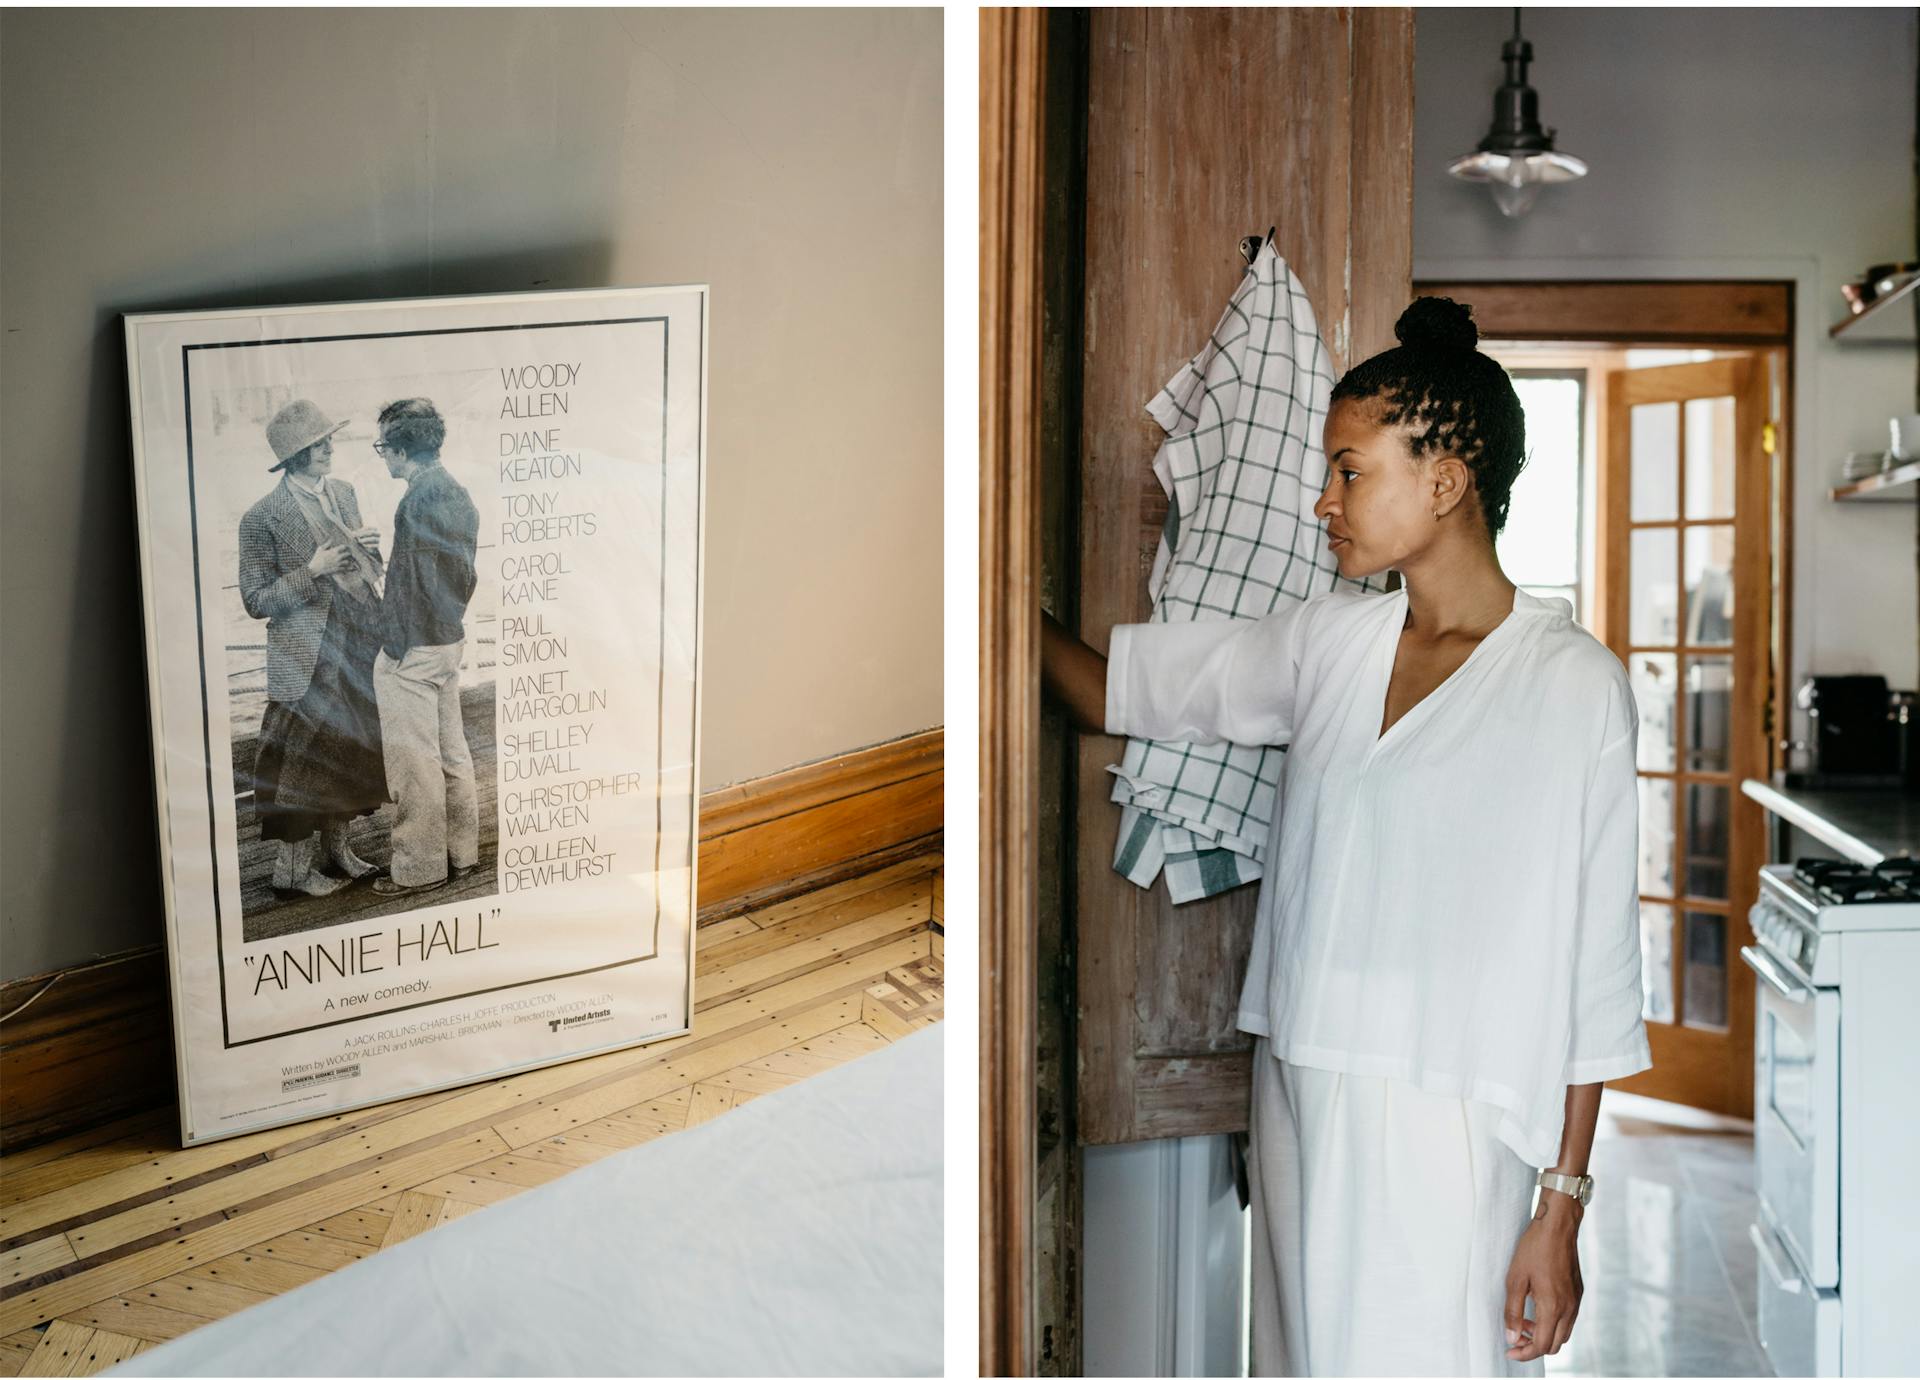 Two images. The first shows an art piece with two people in it. The second shows Kai Avent-deLeon wearing white and standing in a well lit room